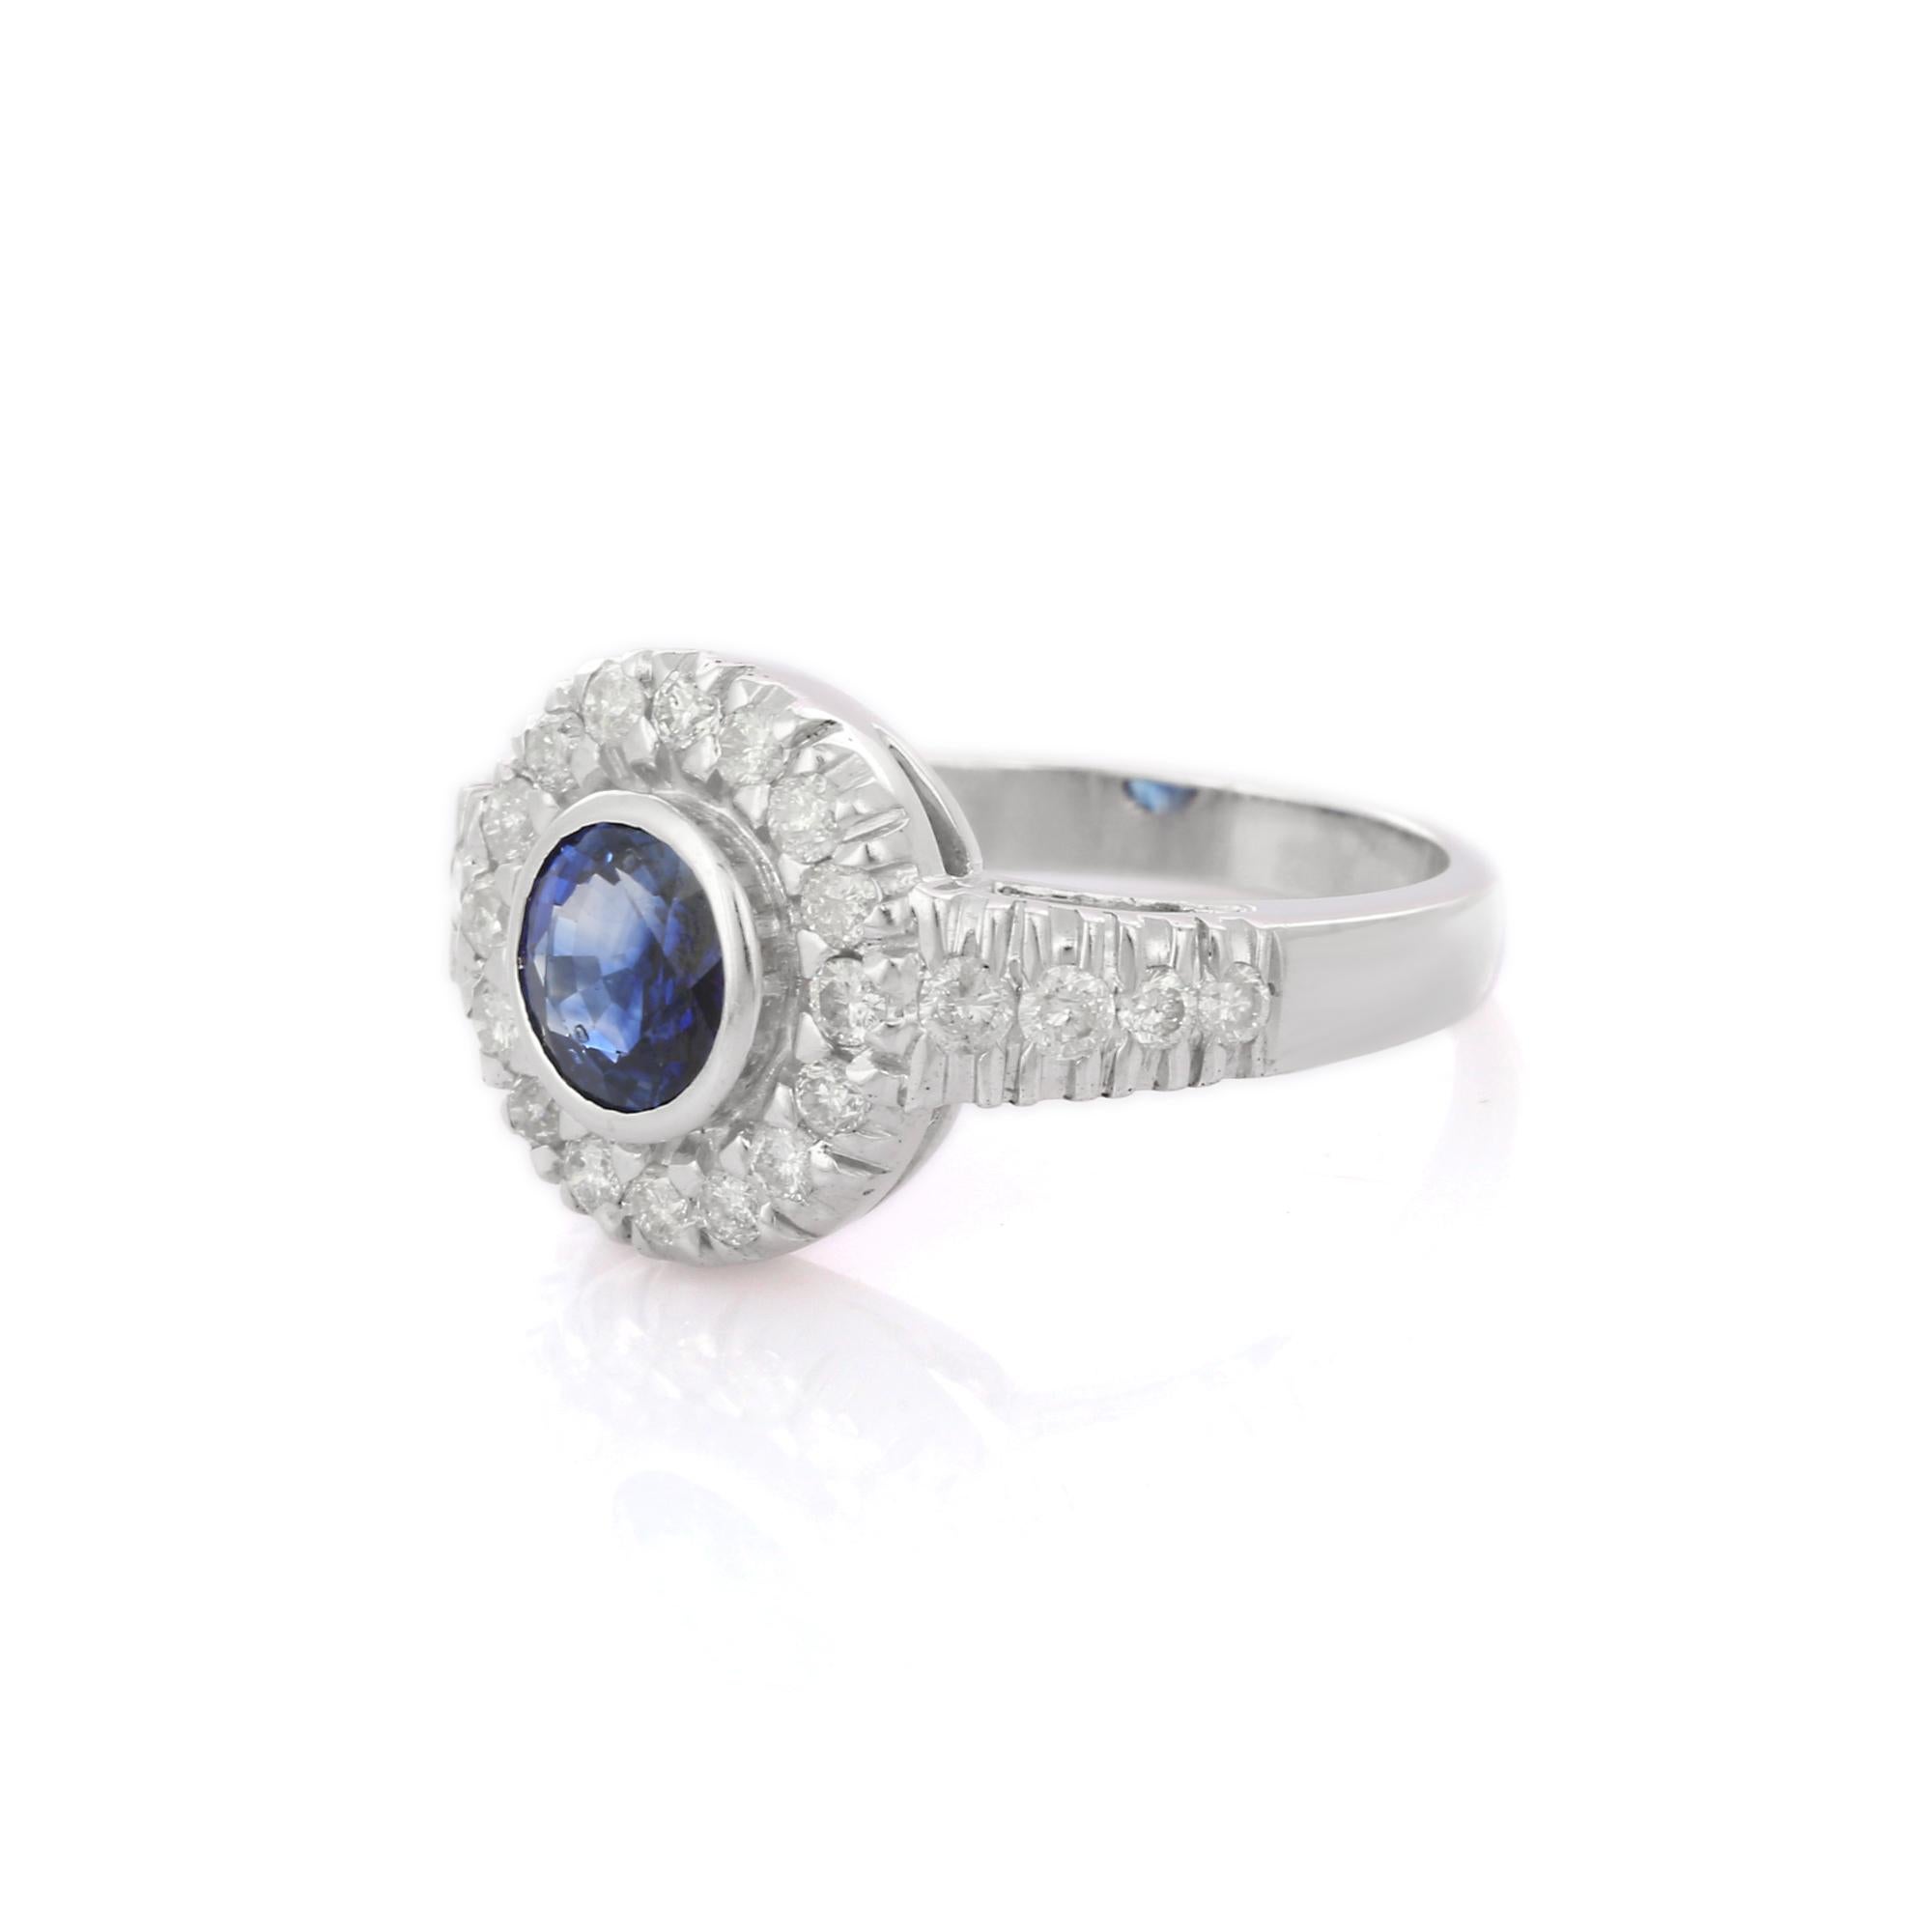 For Sale:  Brilliant 1.15 Ct Round Sapphire with Diamonds Engagement Ring in 18K White Gold 3